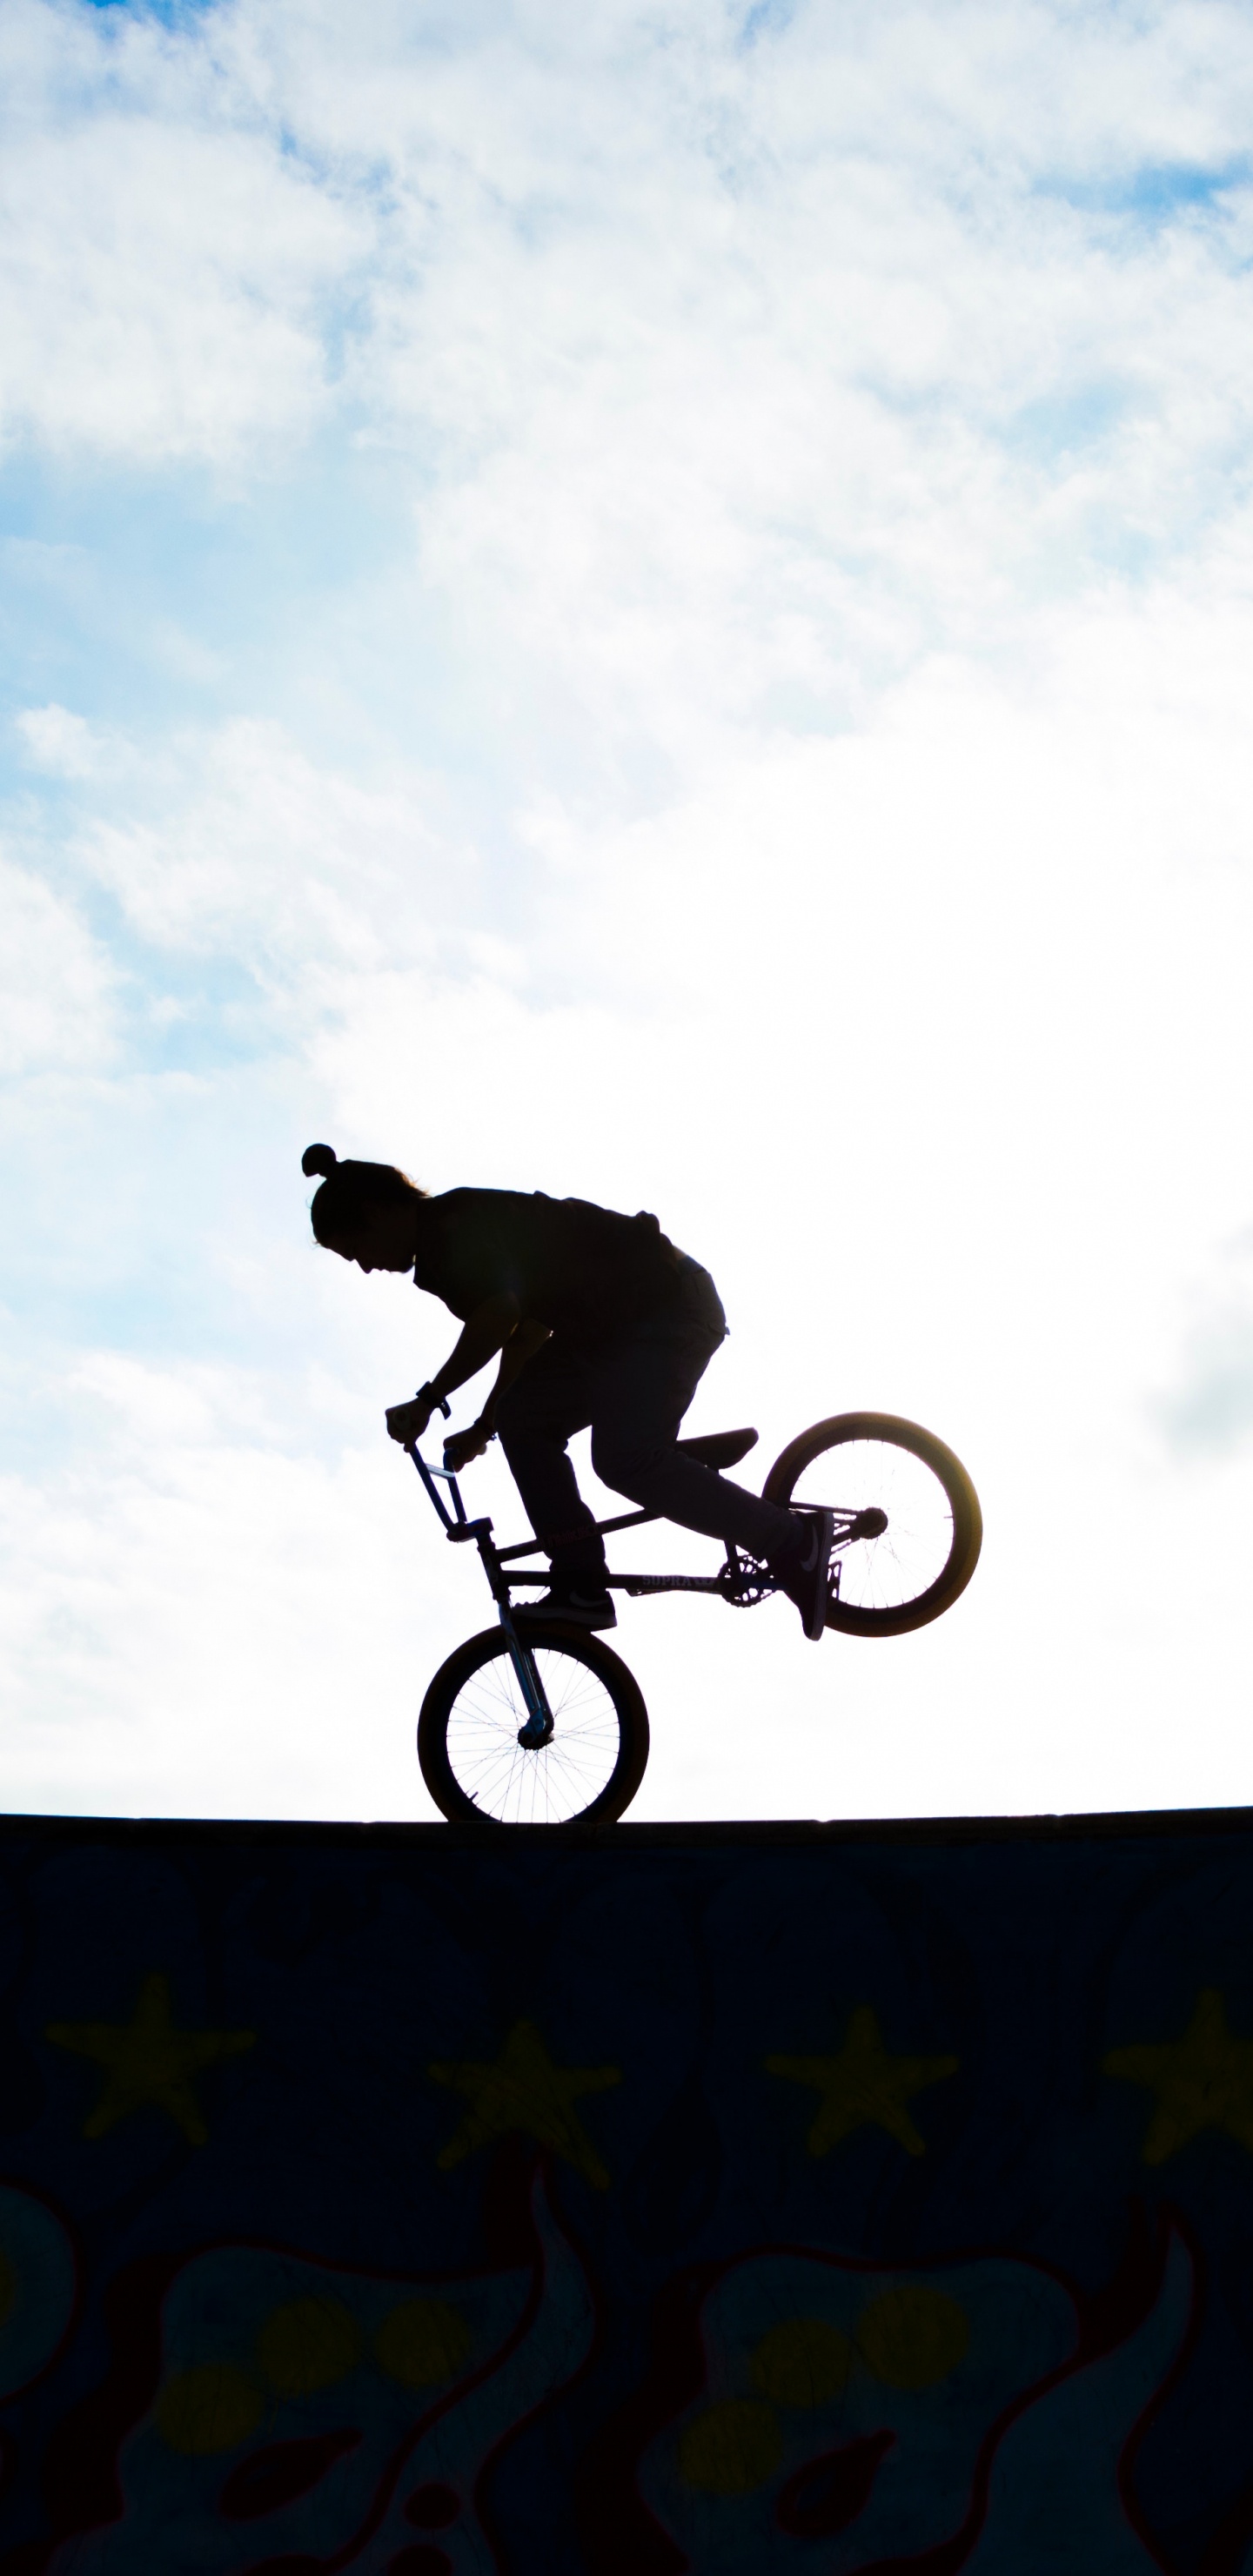 Man Riding Bicycle on Mid Air Under Blue Sky During Daytime. Wallpaper in 1440x2960 Resolution